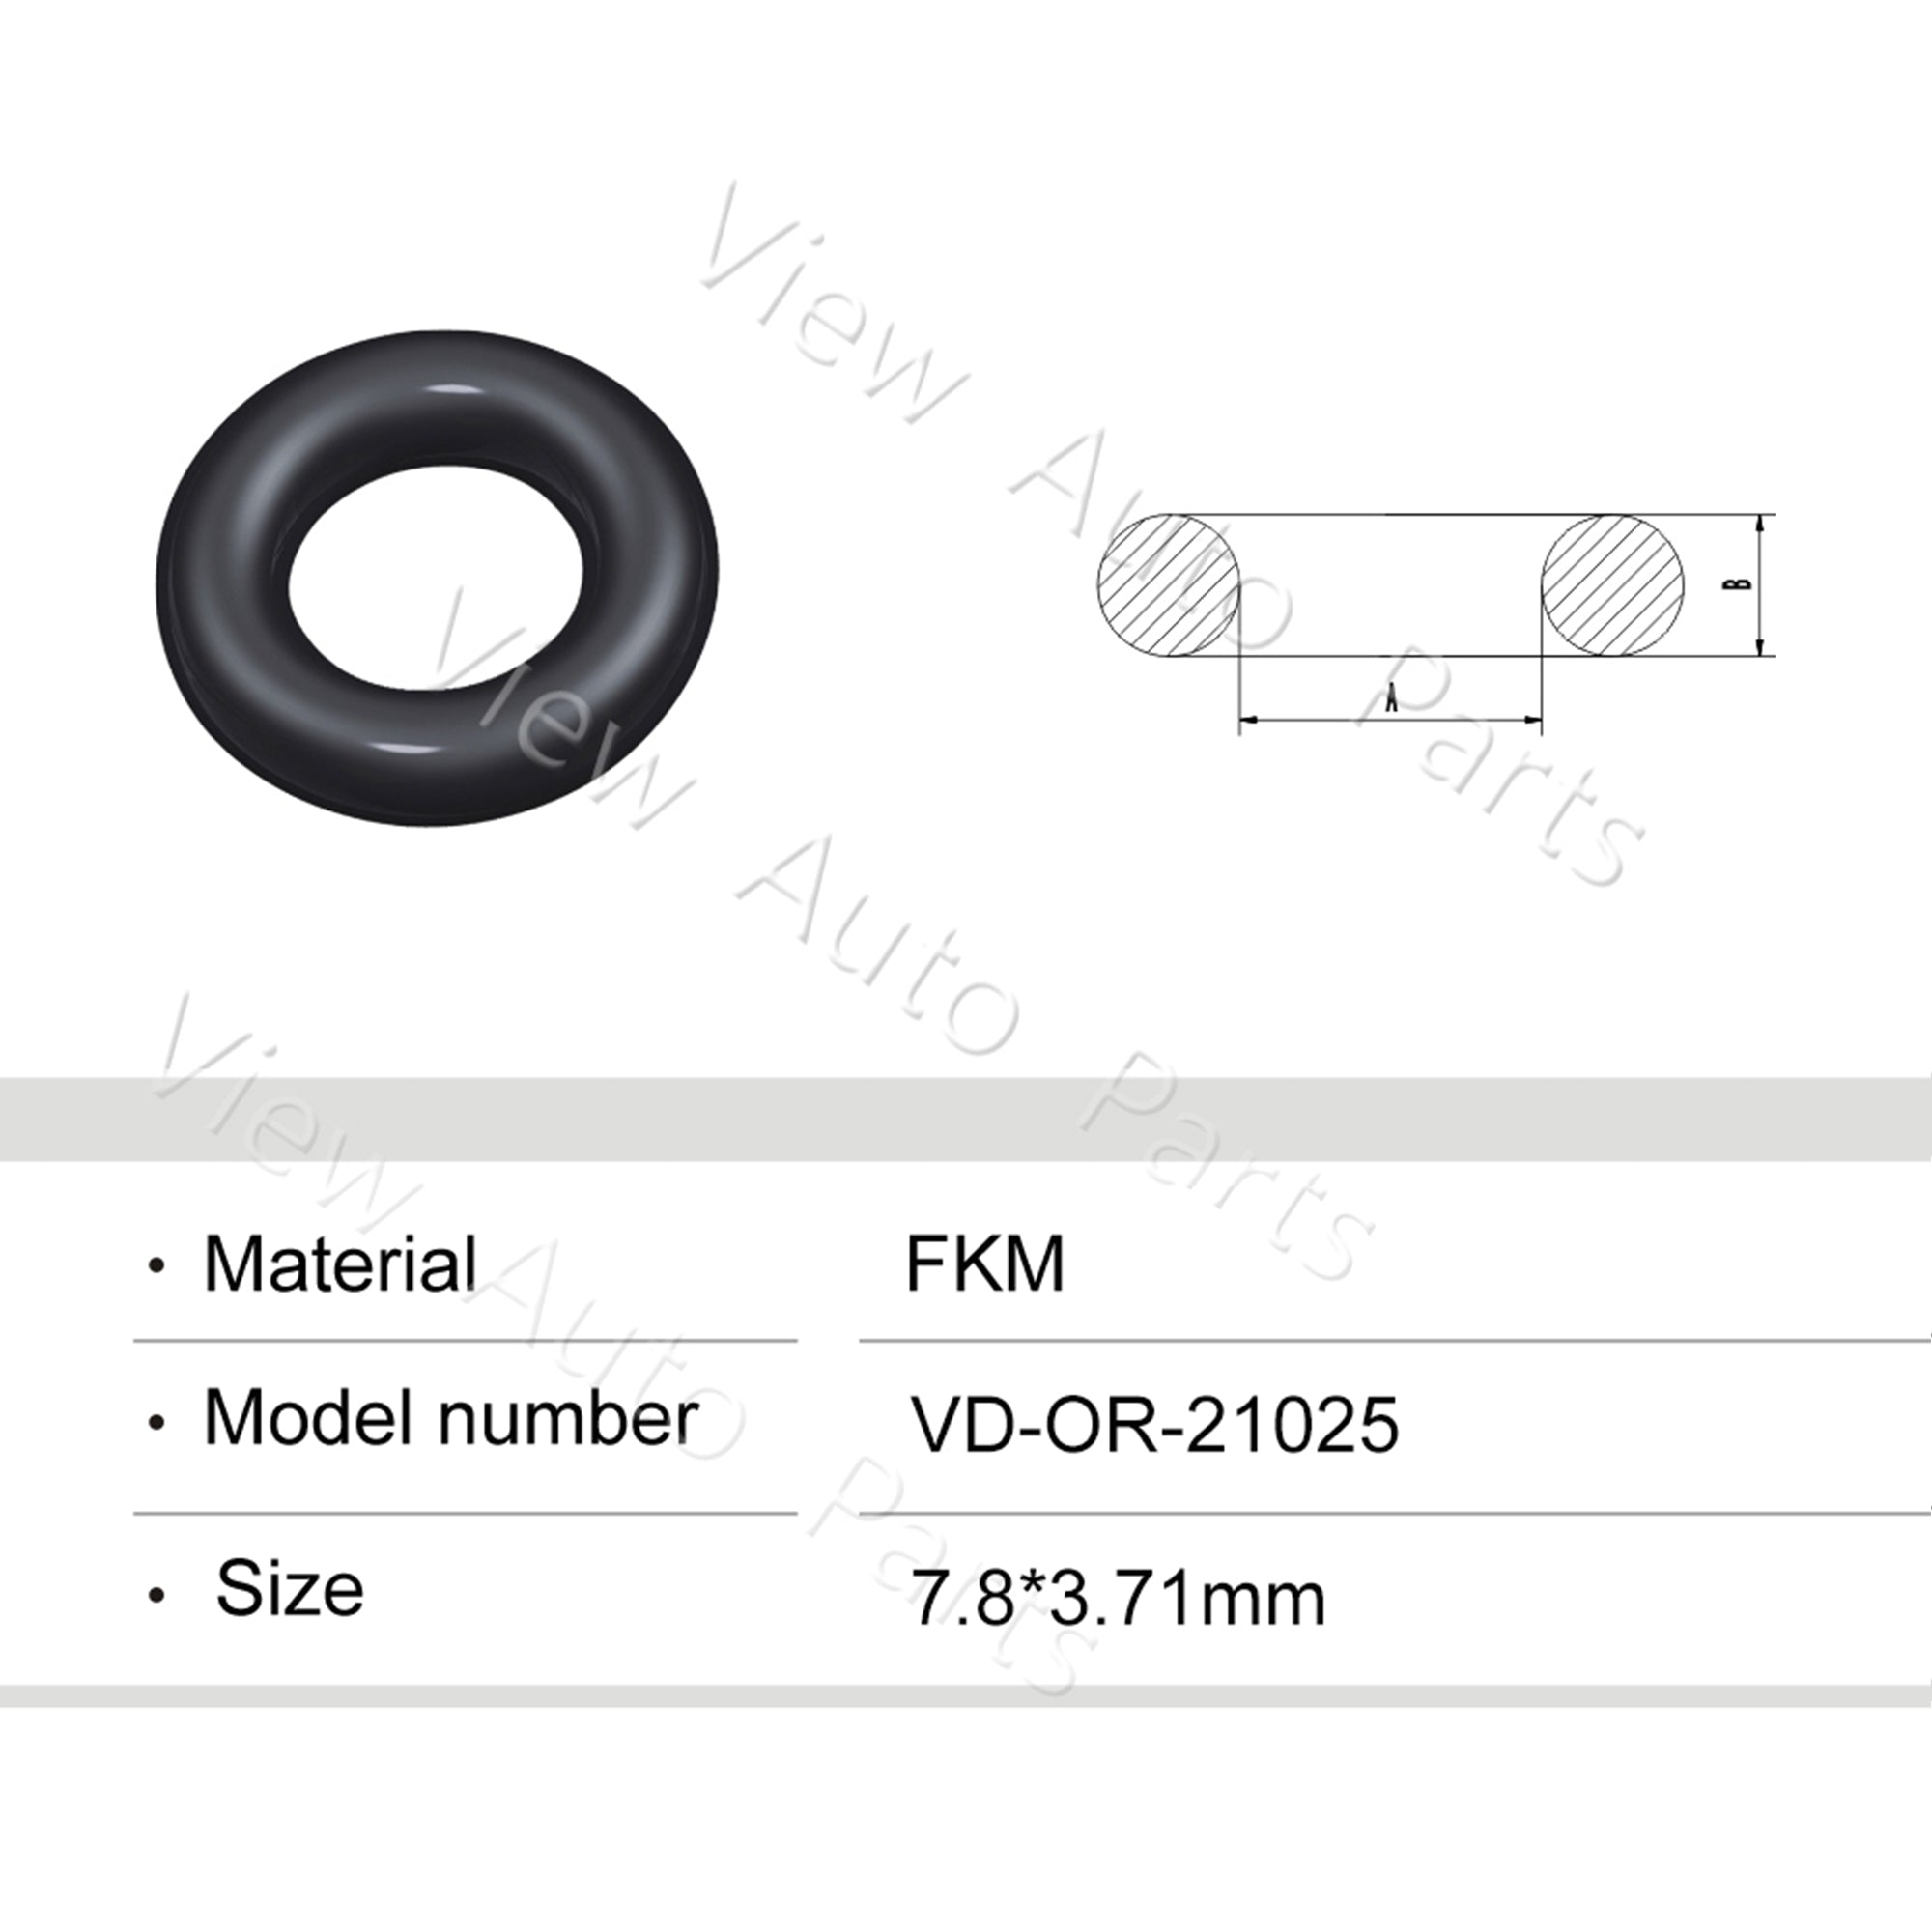 Fuel Injector Rubber Seal Orings for Renaulte Denso 280158034 Fuel Injector Repair Kits FKM & Rubber Heat Resistant, Size: 7.8*3.71mm OR-21025